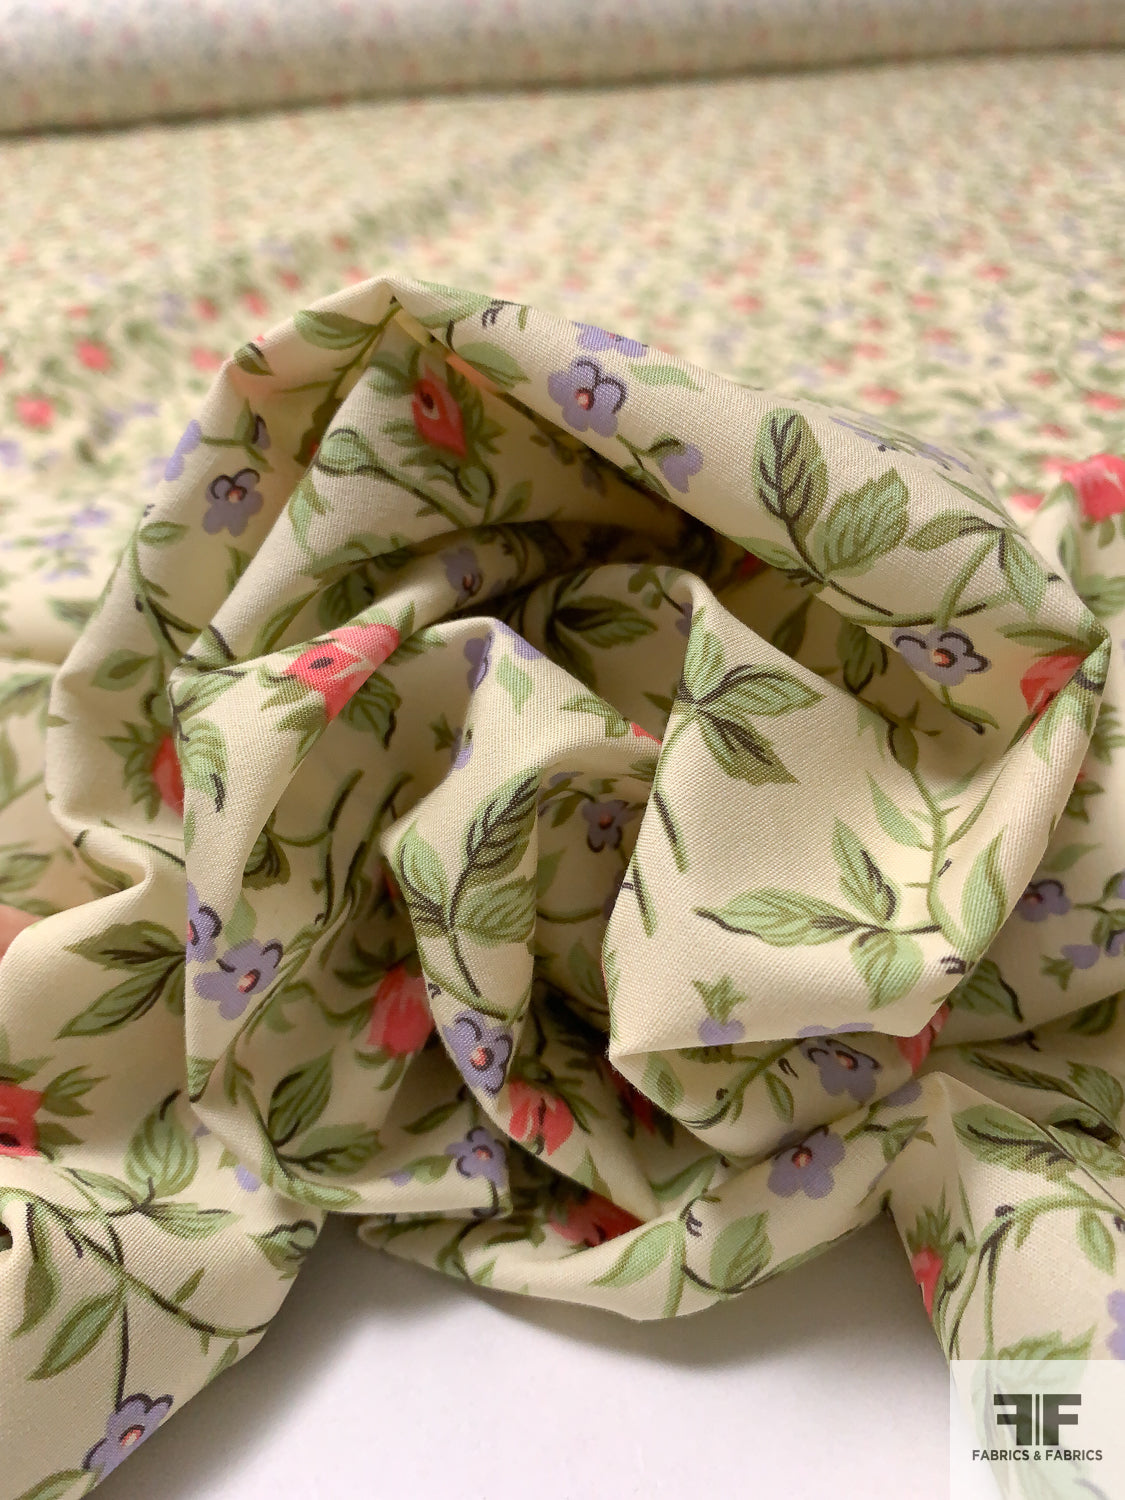 Ditsy Floral Printed Stretch Cotton Poplin - Sand / Green / Lavender / Pink  - Fabric by the Yard